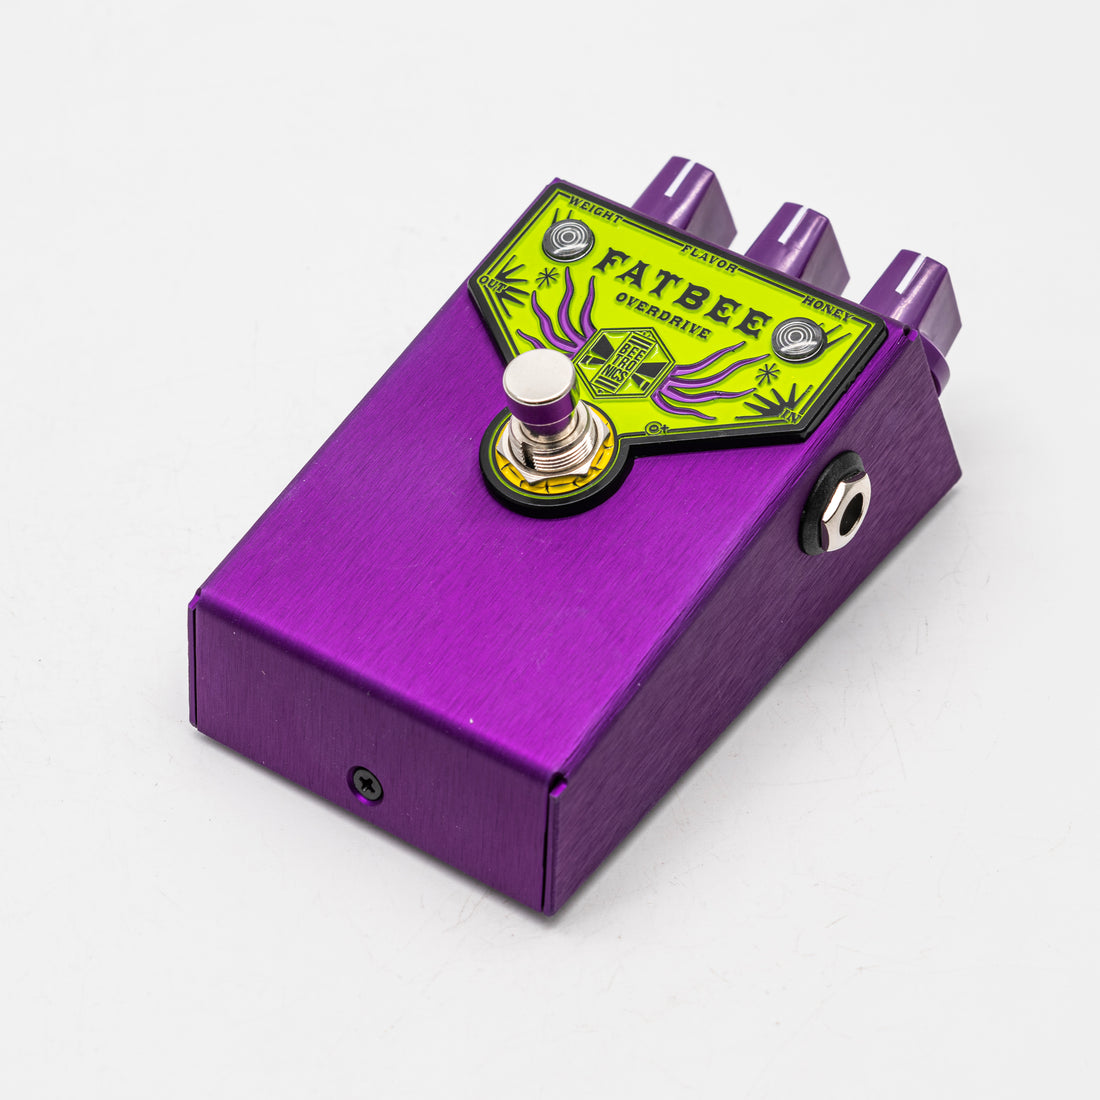 FATBEE - Overdrive &lt;p&gt; Limited Edition &quot;Donatello&quot;